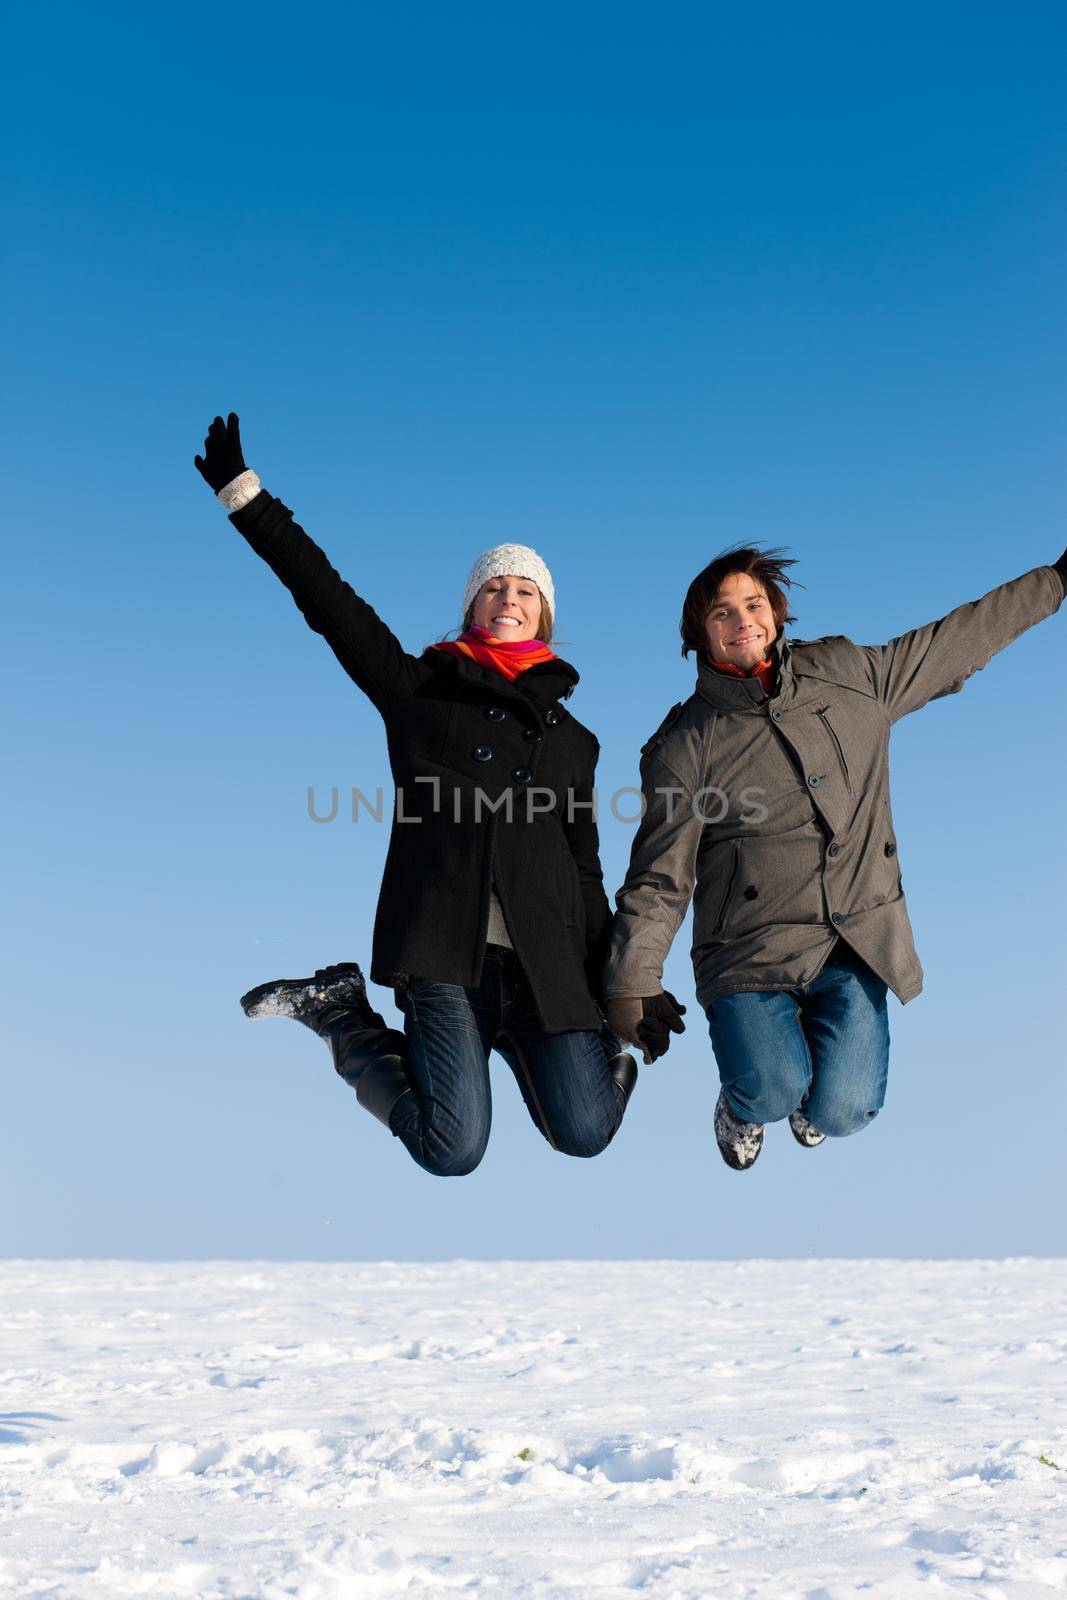 Couple - man and woman - jumping high on a winter day